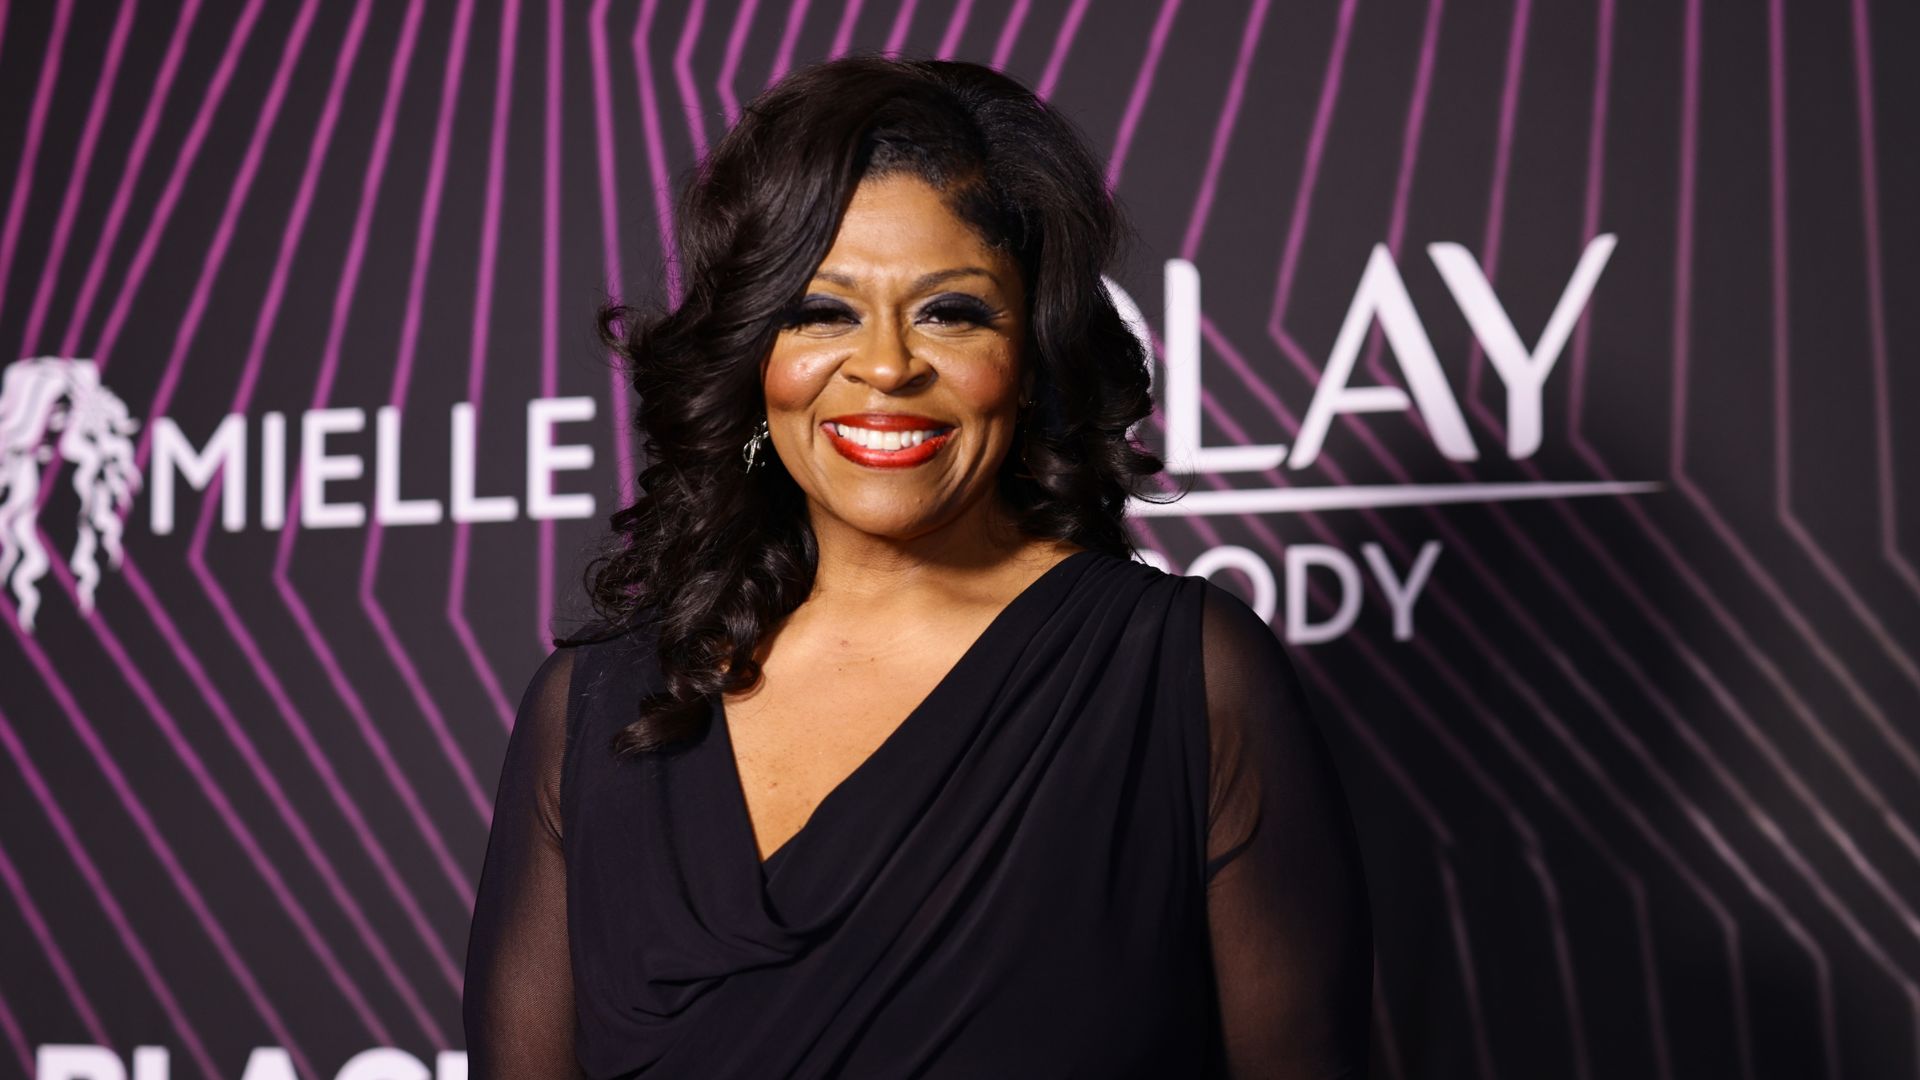 Kim Burrell apologizes to LGBT people after calling them ‘perverts’